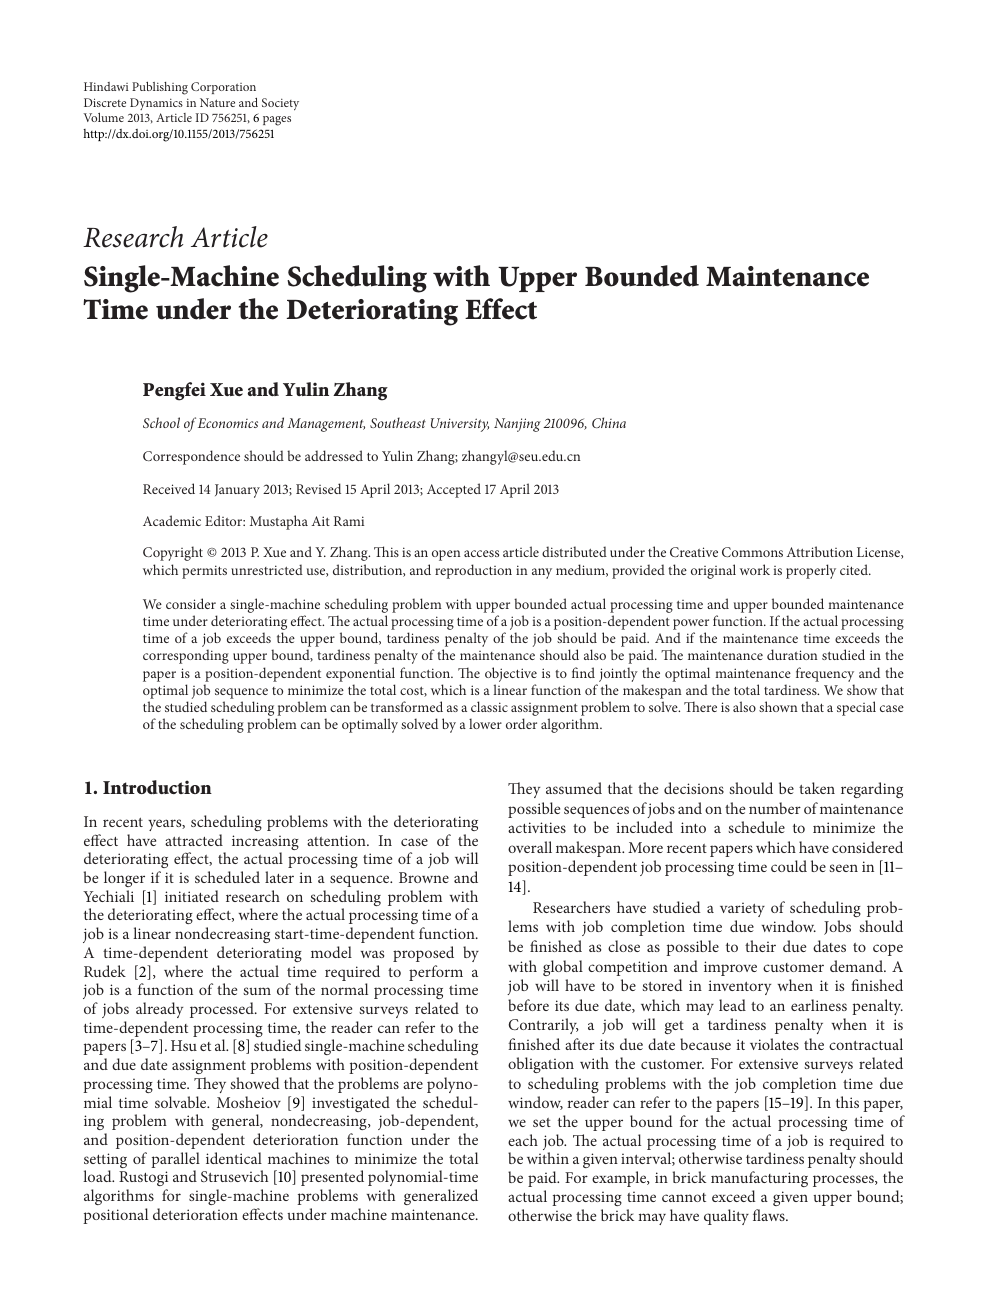 Single Machine Scheduling With Upper Bounded Maintenance Time Under The Deteriorating Effect Topic Of Research Paper In Mathematics Download Scholarly Article Pdf And Read For Free On Cyberleninka Open Science Hub